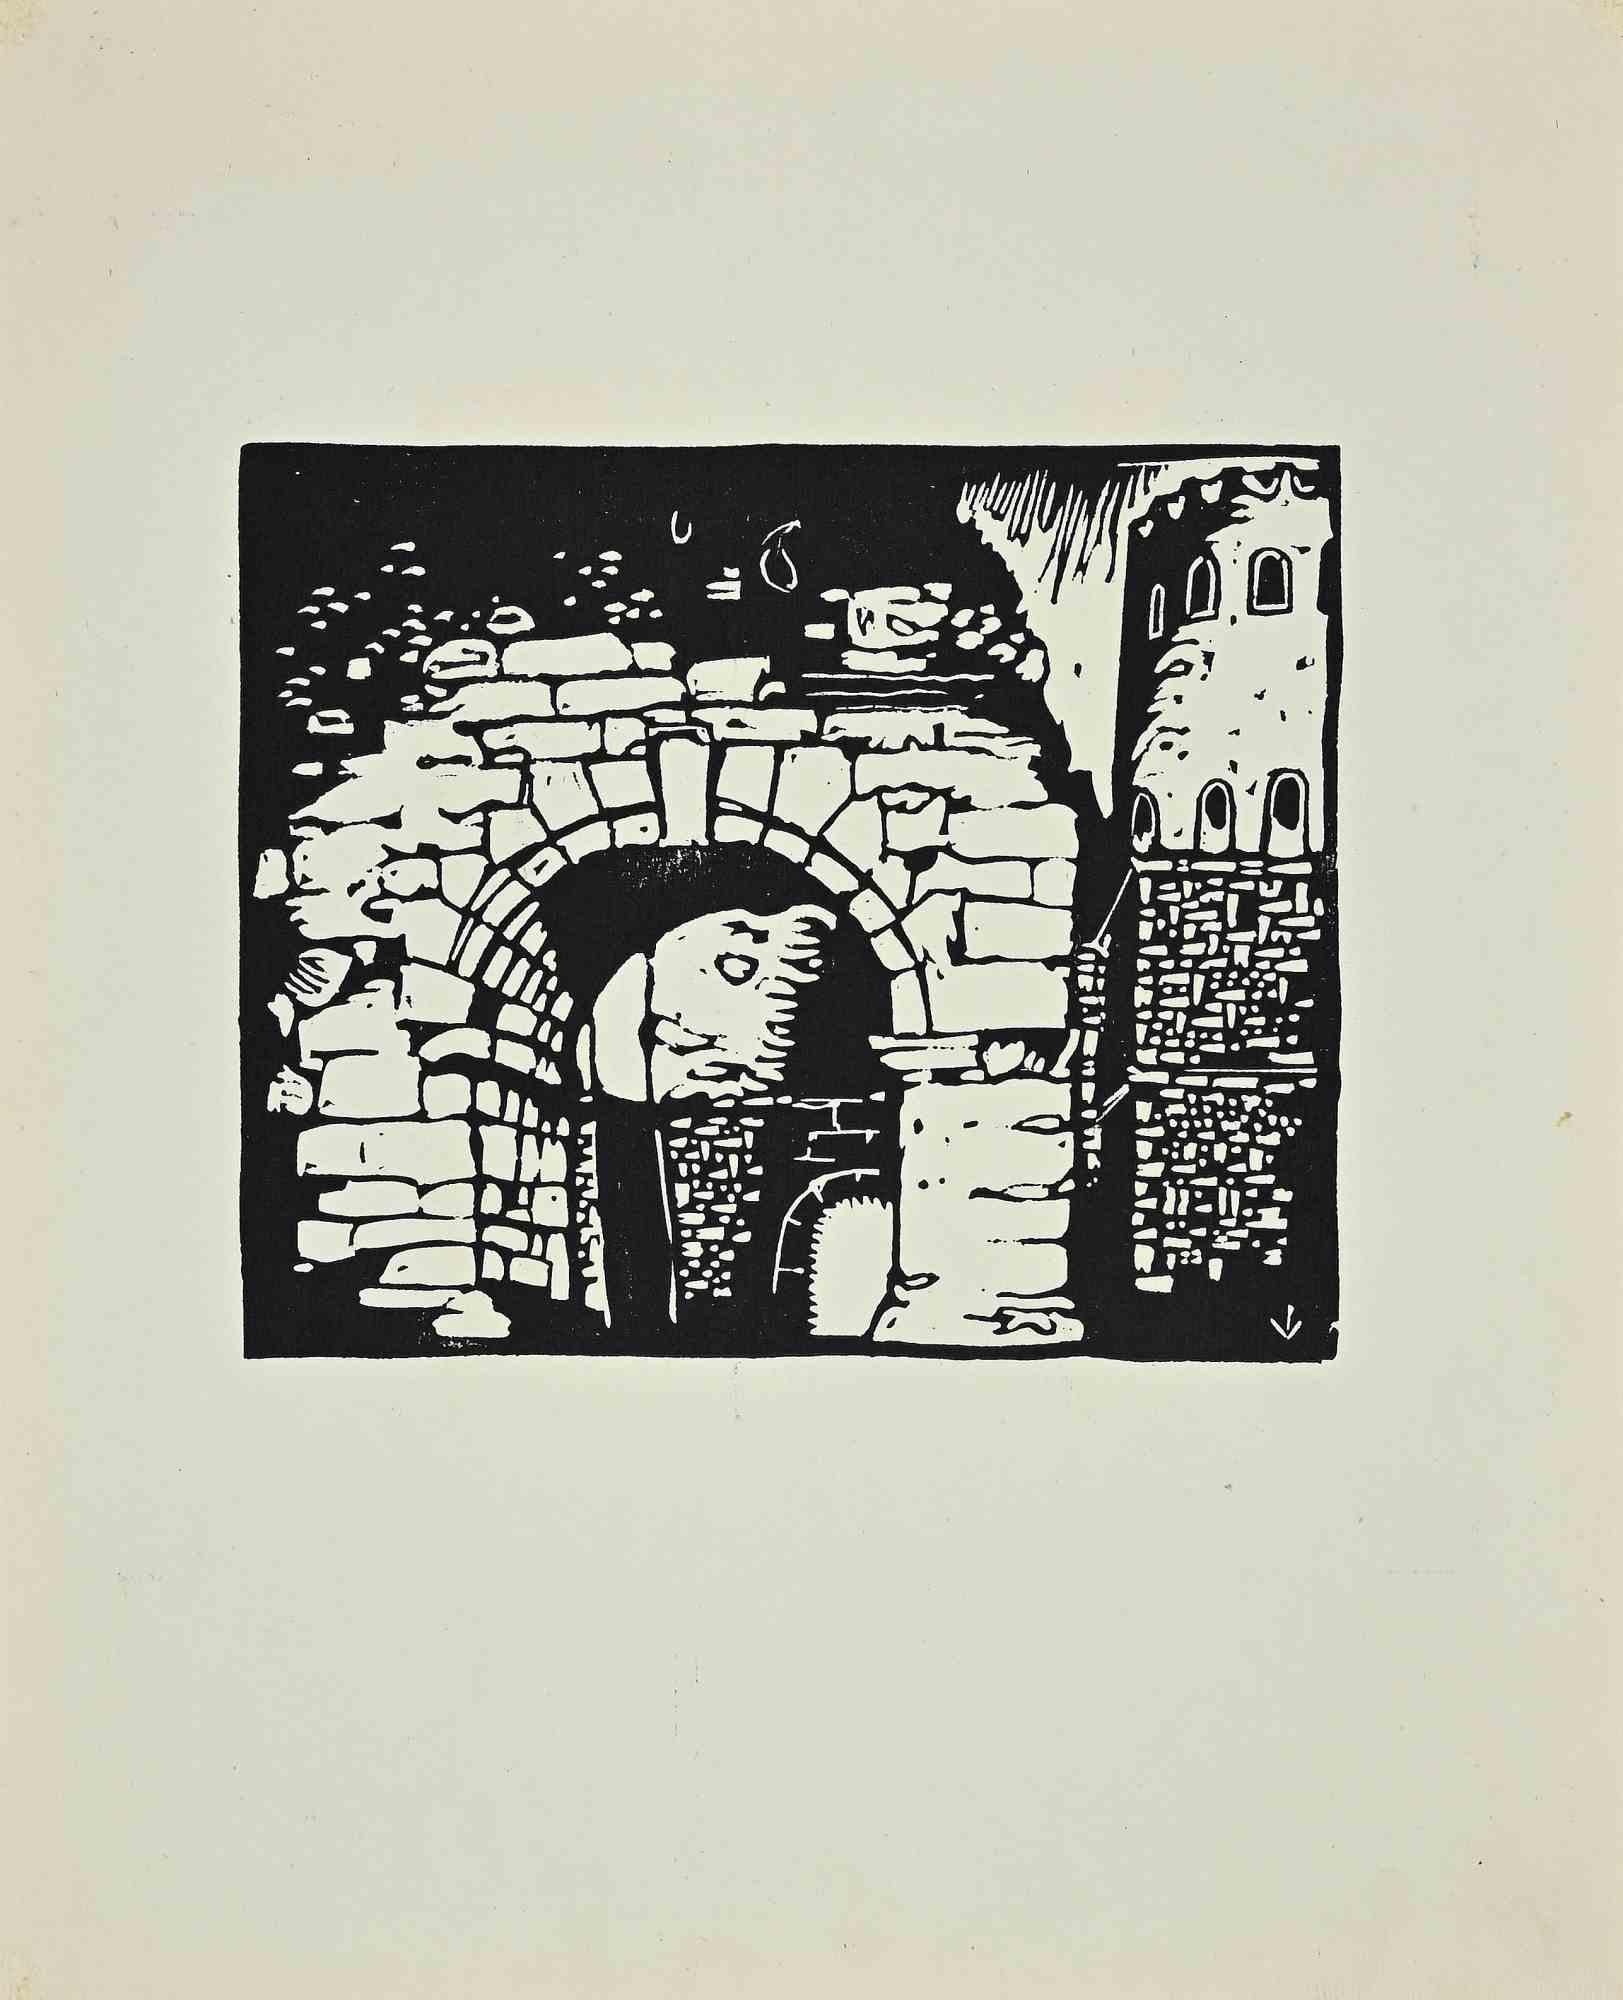 The Castle is an original Woodcut realized by Giorgio Wenter Marini in 1925.

Good conditions.

The artwork is depicted through perfect hatching in a well-balanced composition.